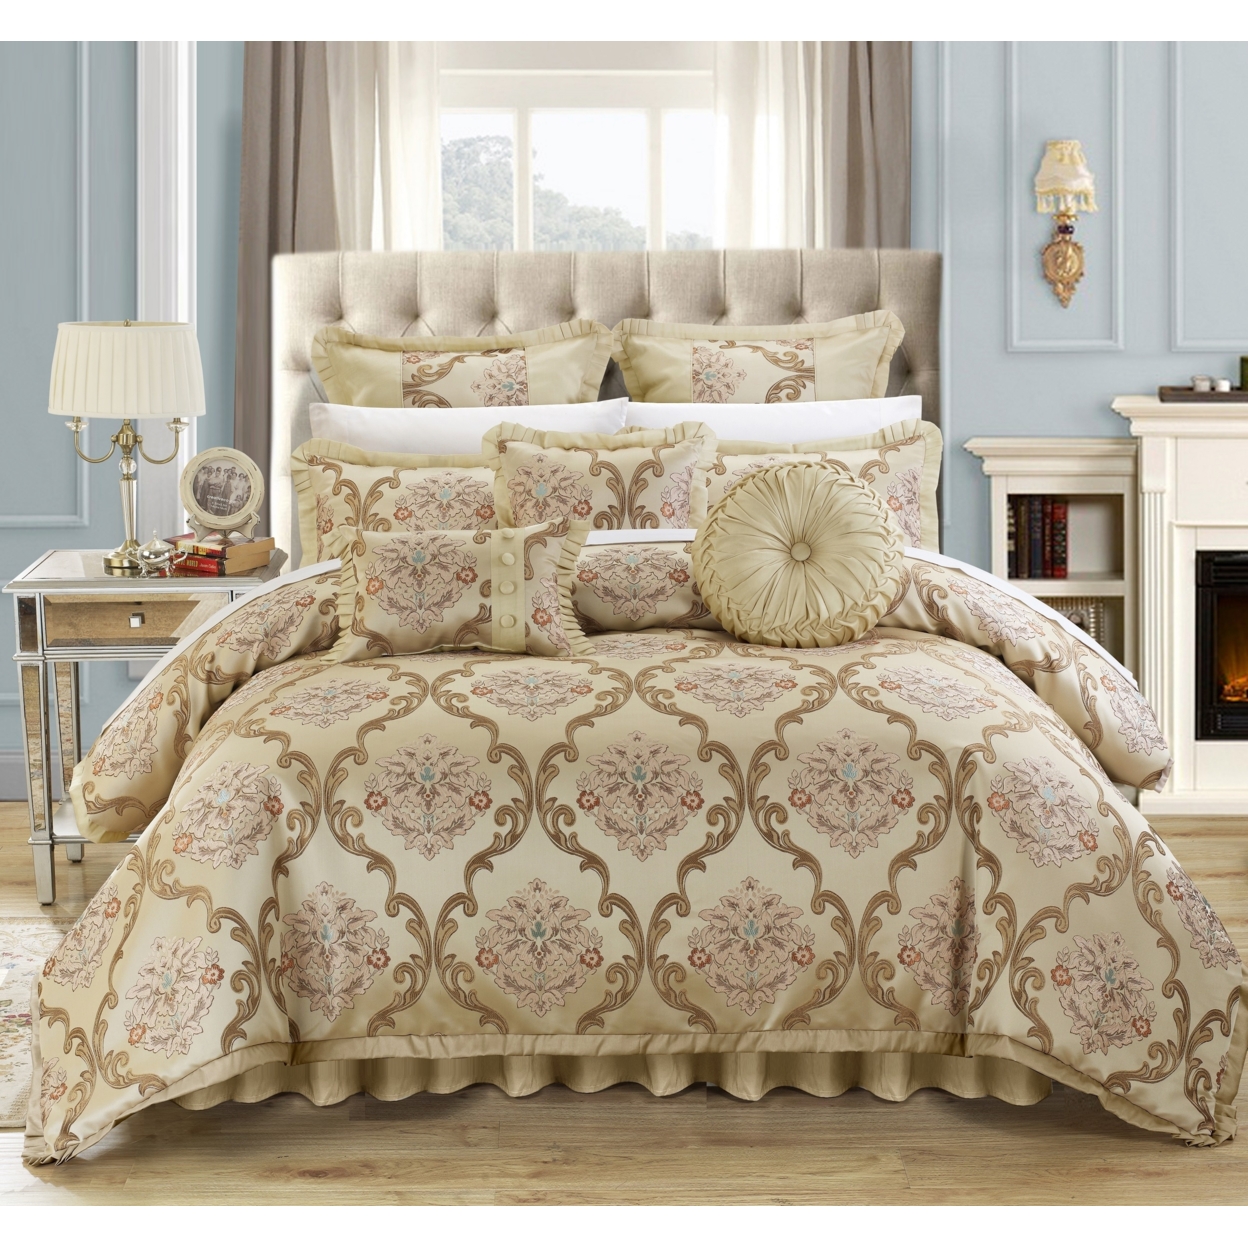 9 Piece Aubrey Decorator Upholstery Quality Jacquard Scroll Fabric Complete Master Bedroom Comforter Set And Pillows Ensemble - Beige, Queen